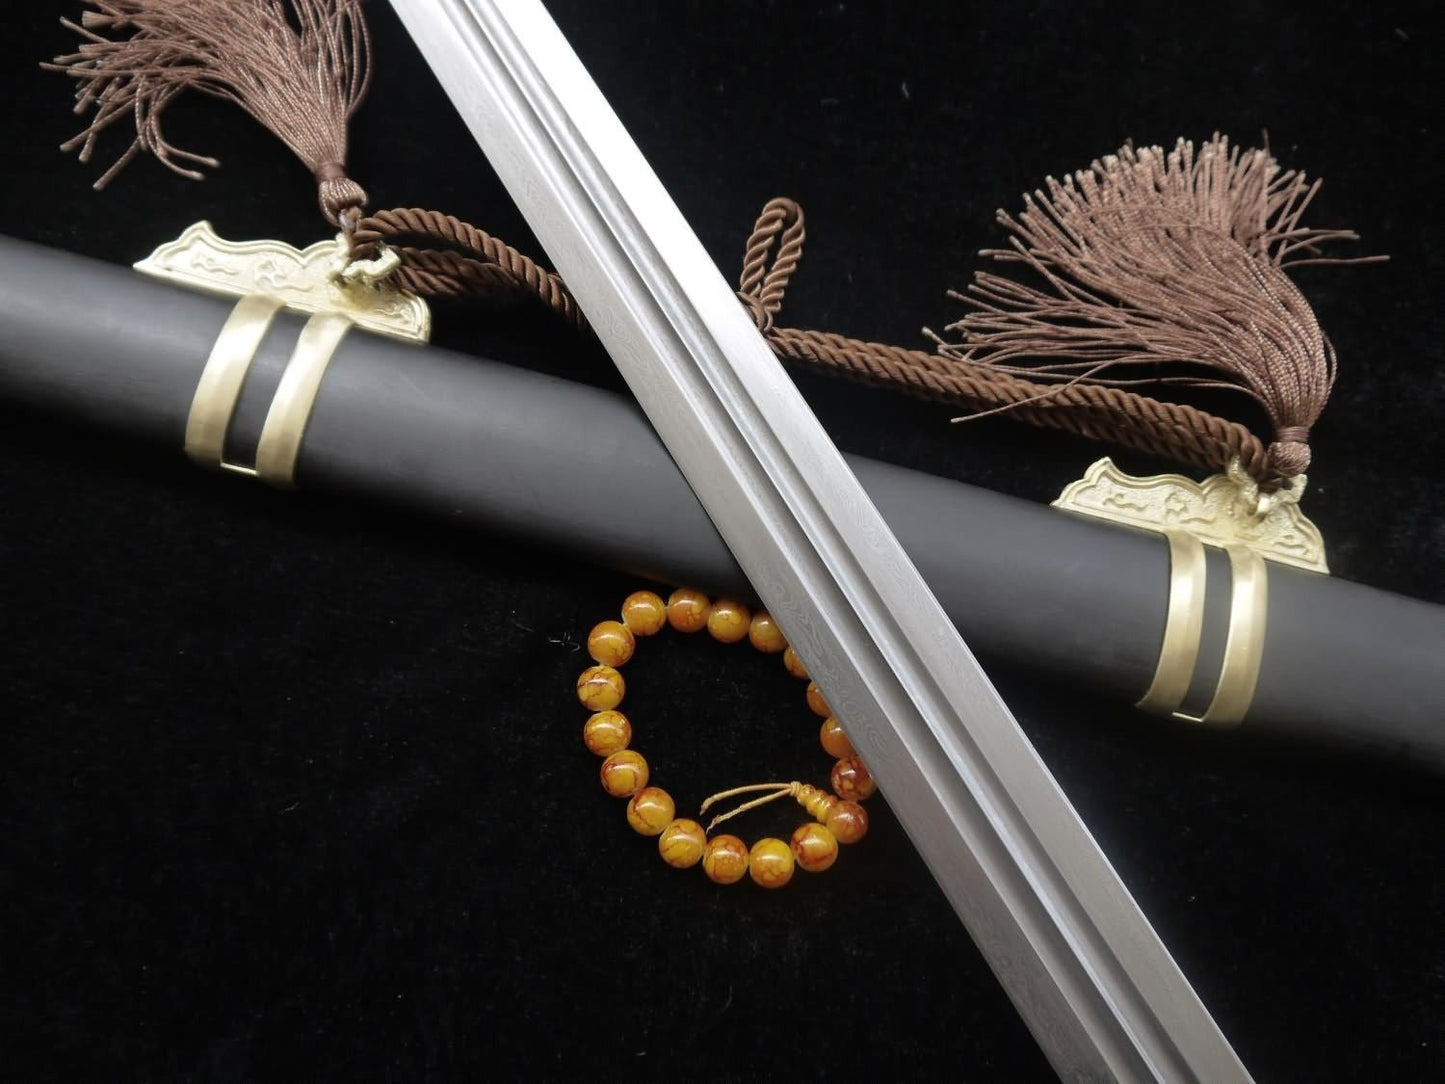 Tang sword,Folded steel,Black scabbard,skin hilt,Copper fitting,Length 39 inch - Chinese sword shop